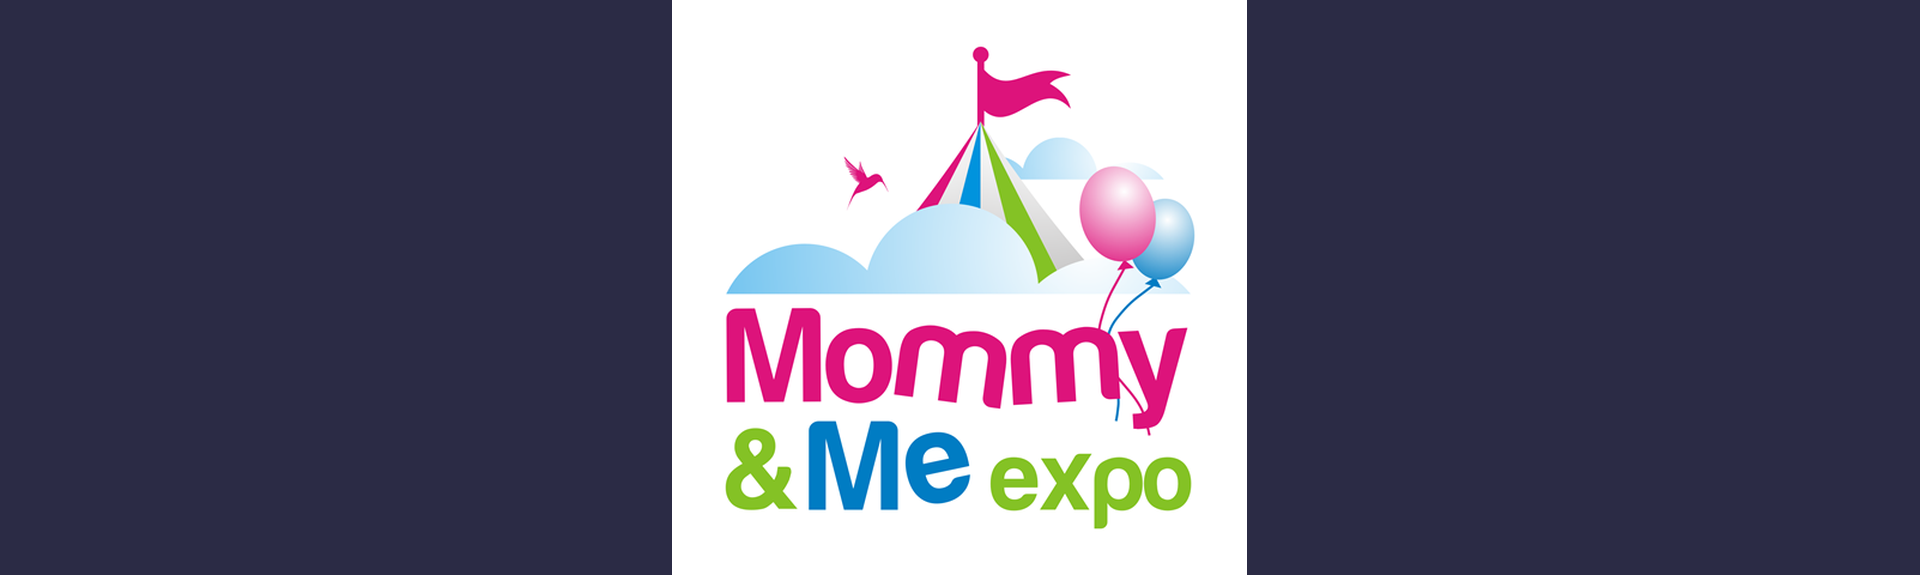 Mommy and Me Expo 2018 - Durbanville